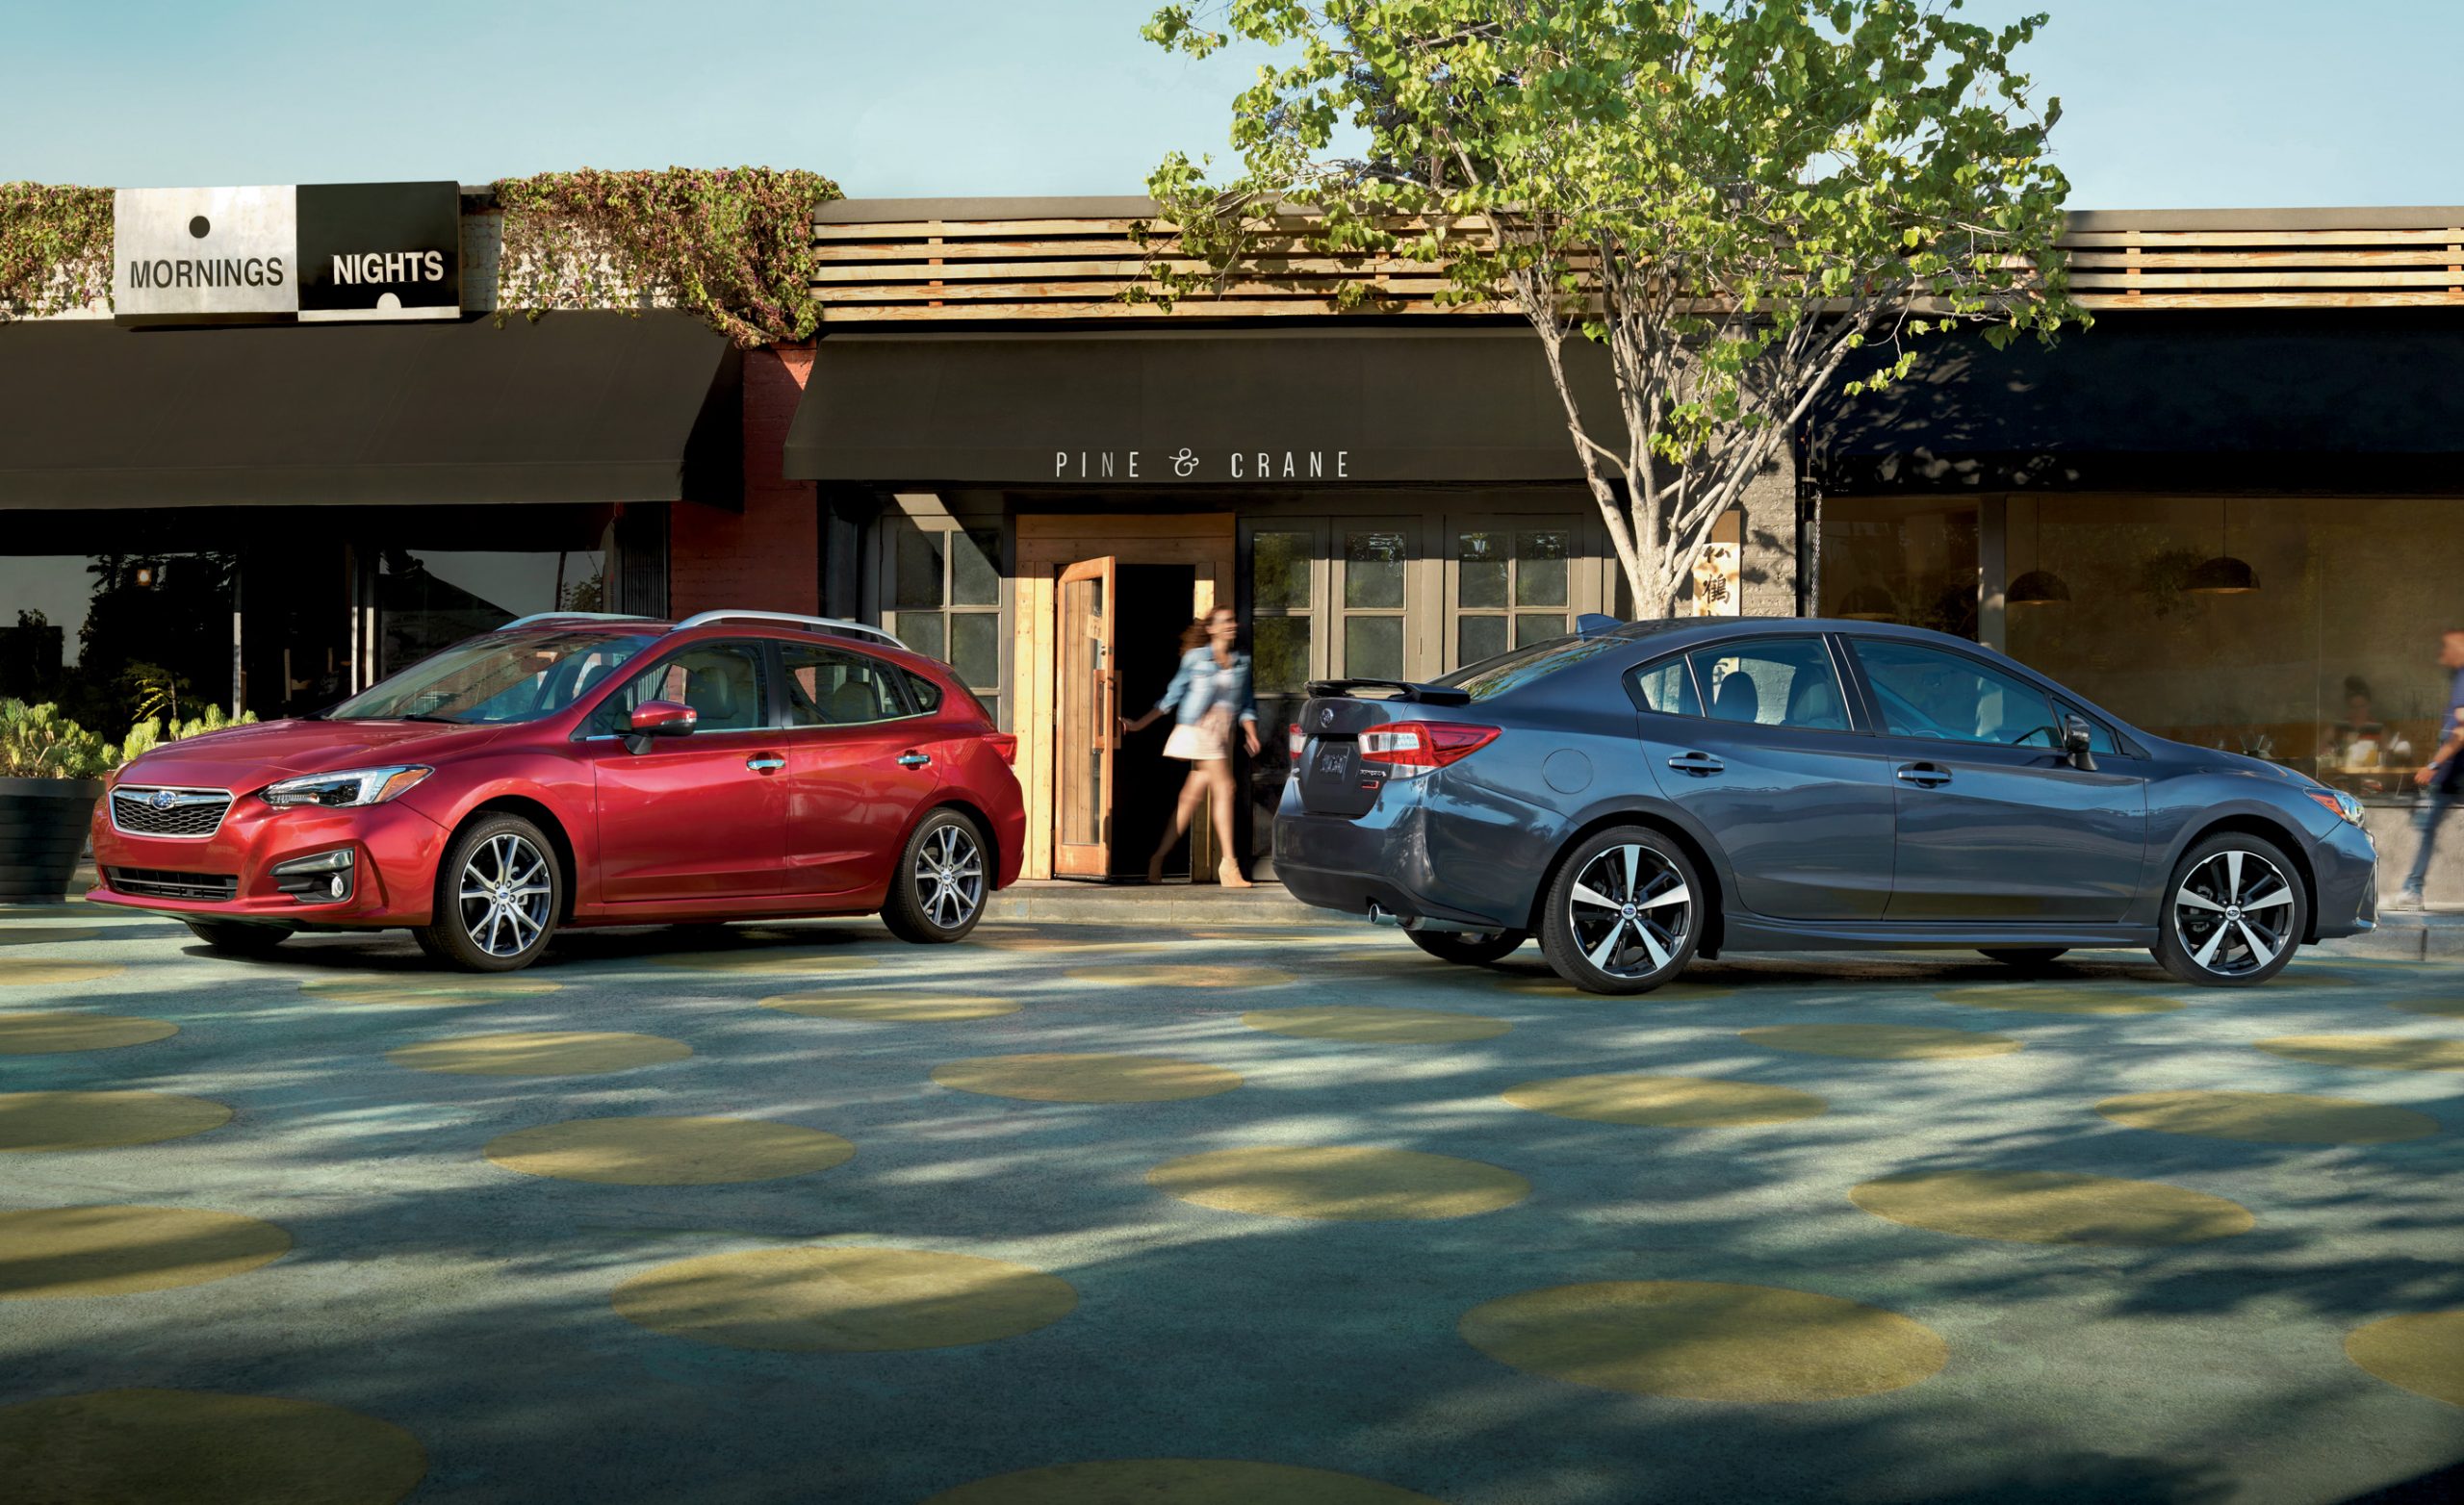 A pair of Subaru Impreza models, either of which makes for an excellent cheap used car. Seen here in red and grey.